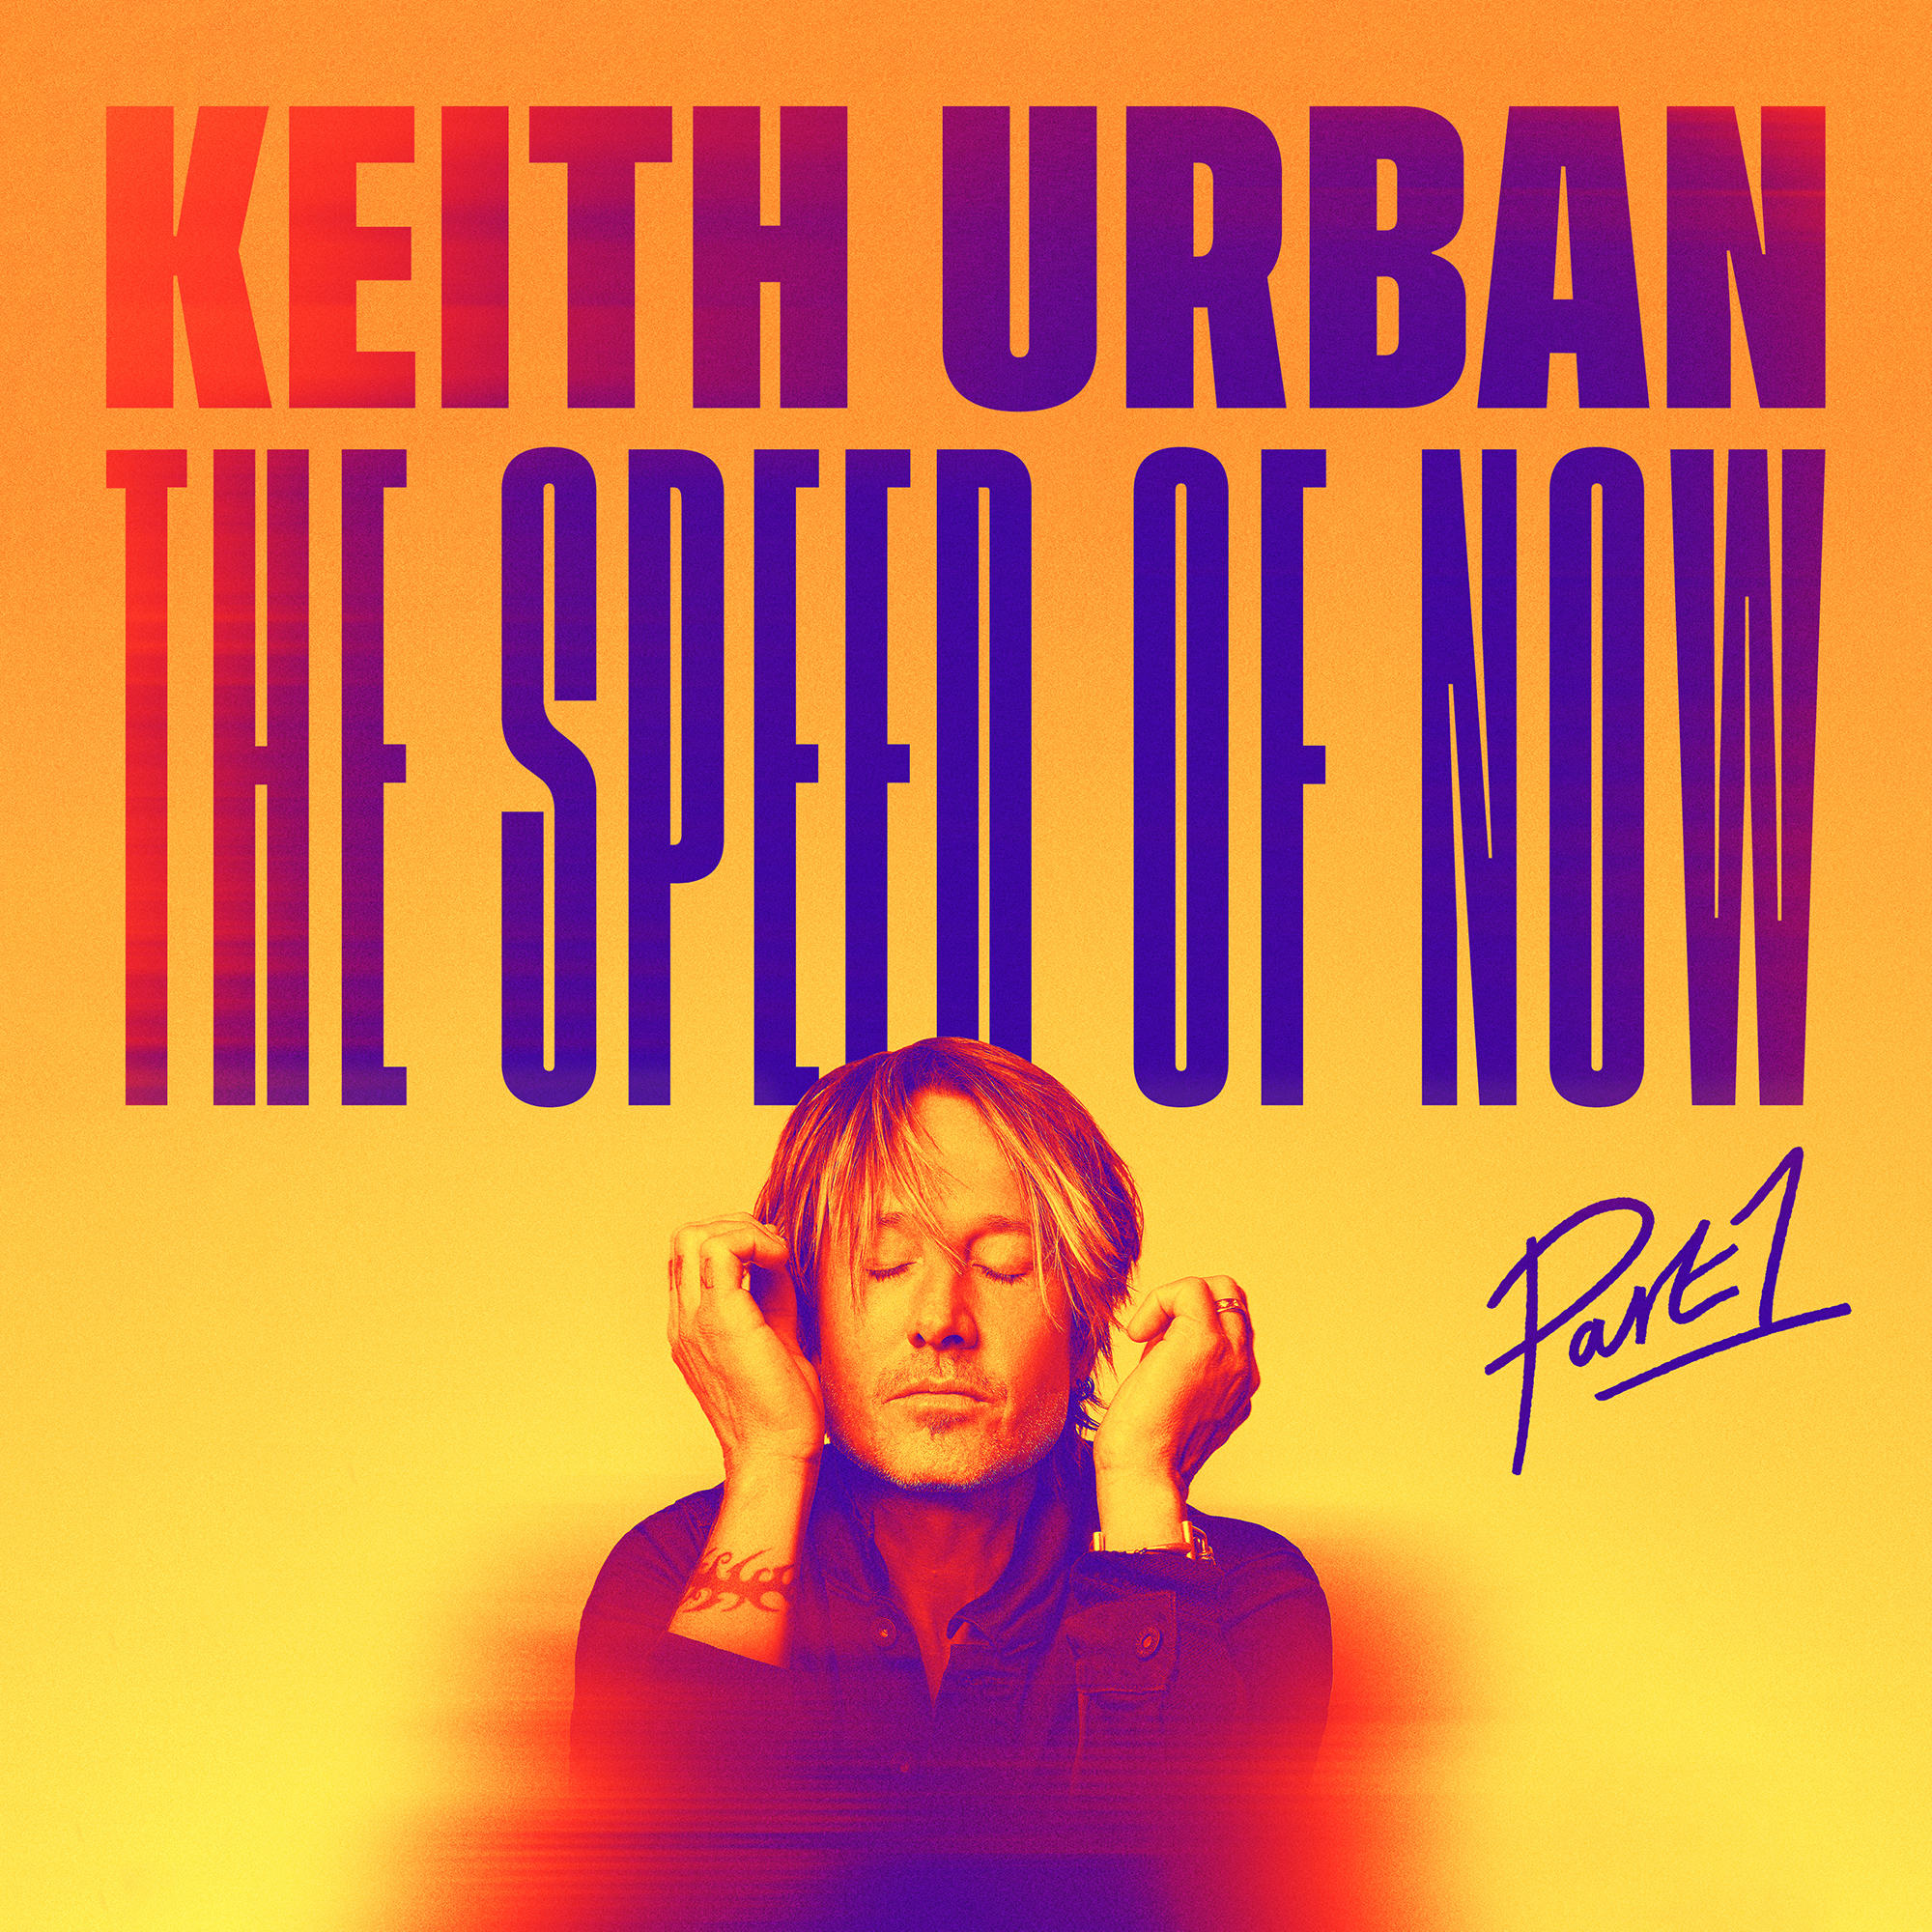 Keith Urban - THE SPEED OF NOW Part 1 Album Cover